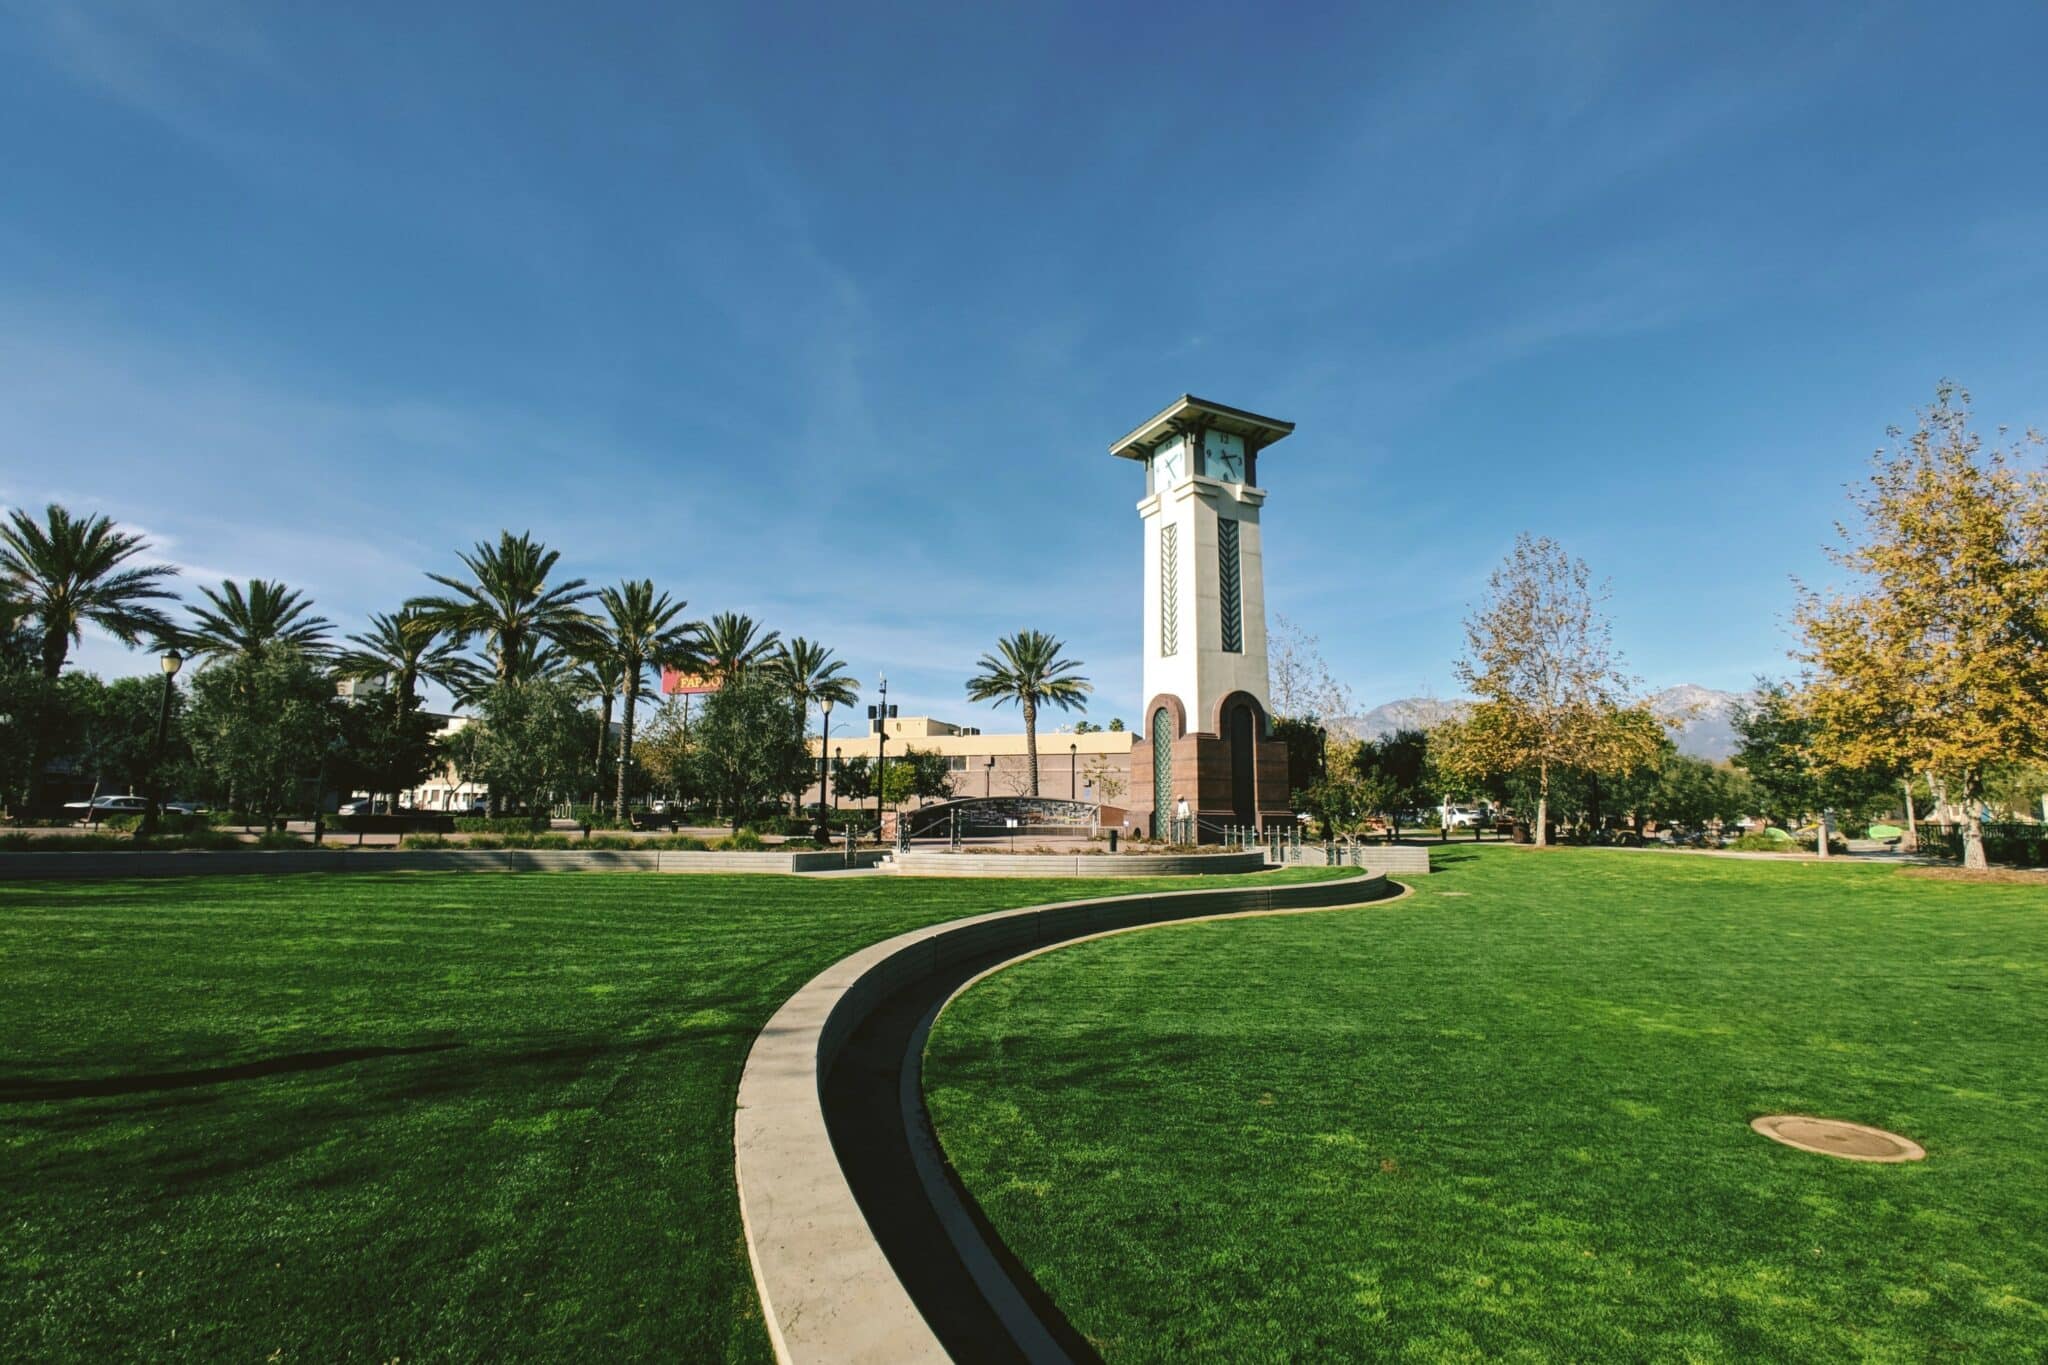 White, tall clock building on a green grass against a light blue sky, with palm trees in the background